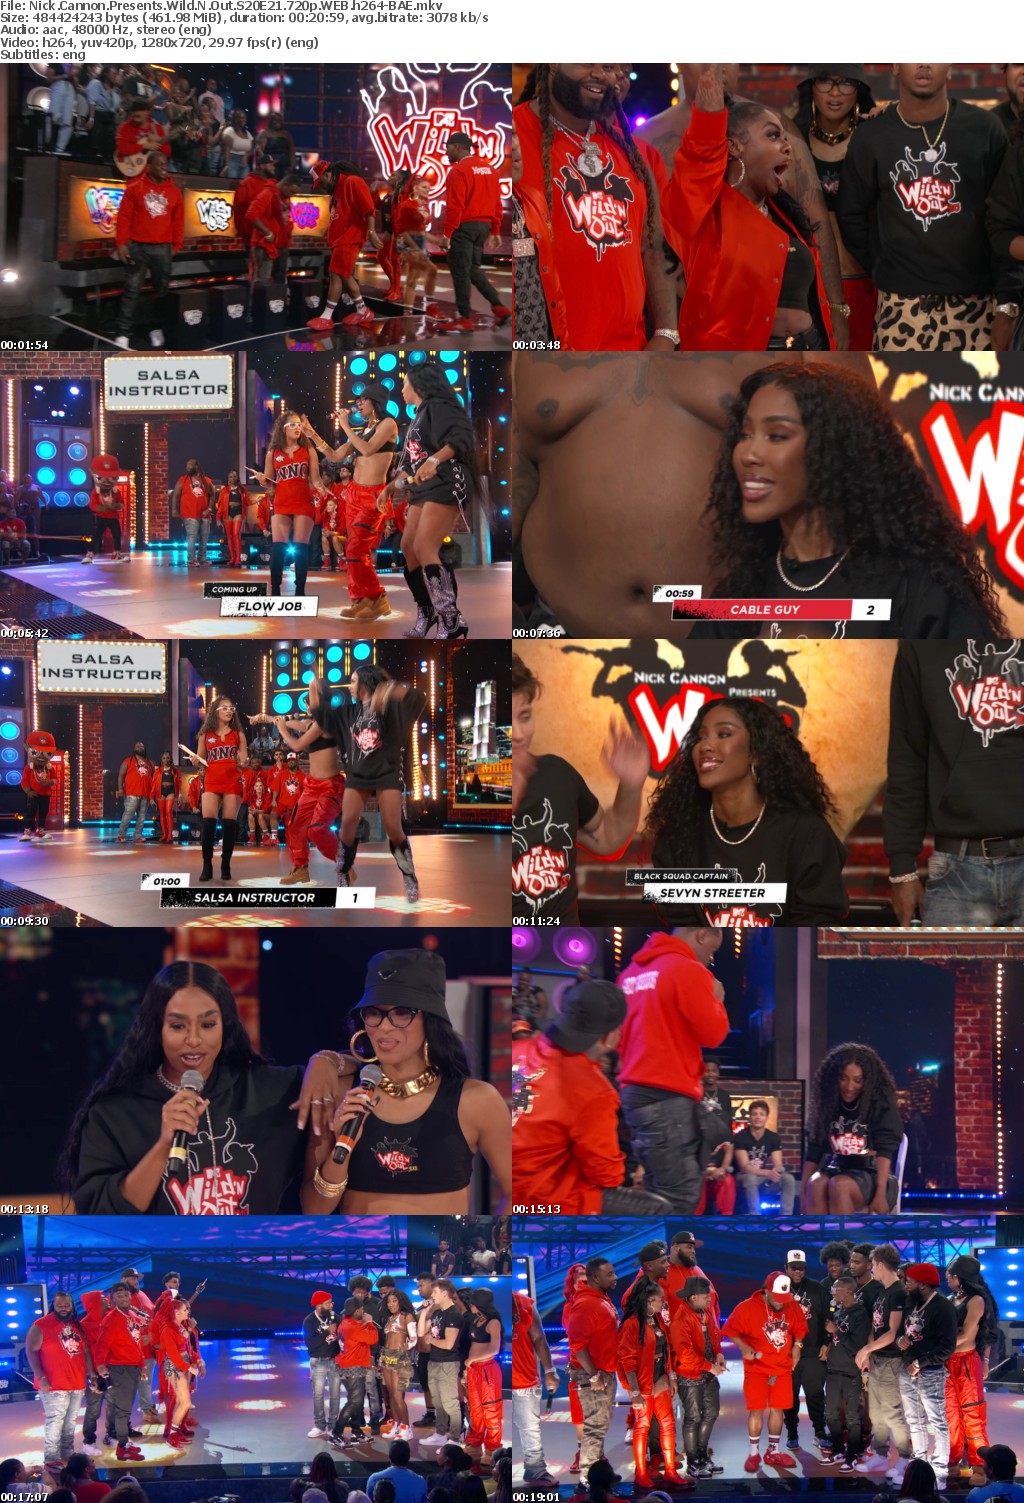 Nick Cannon Presents Wild N Out S20E21 720p WEB h264-BAE